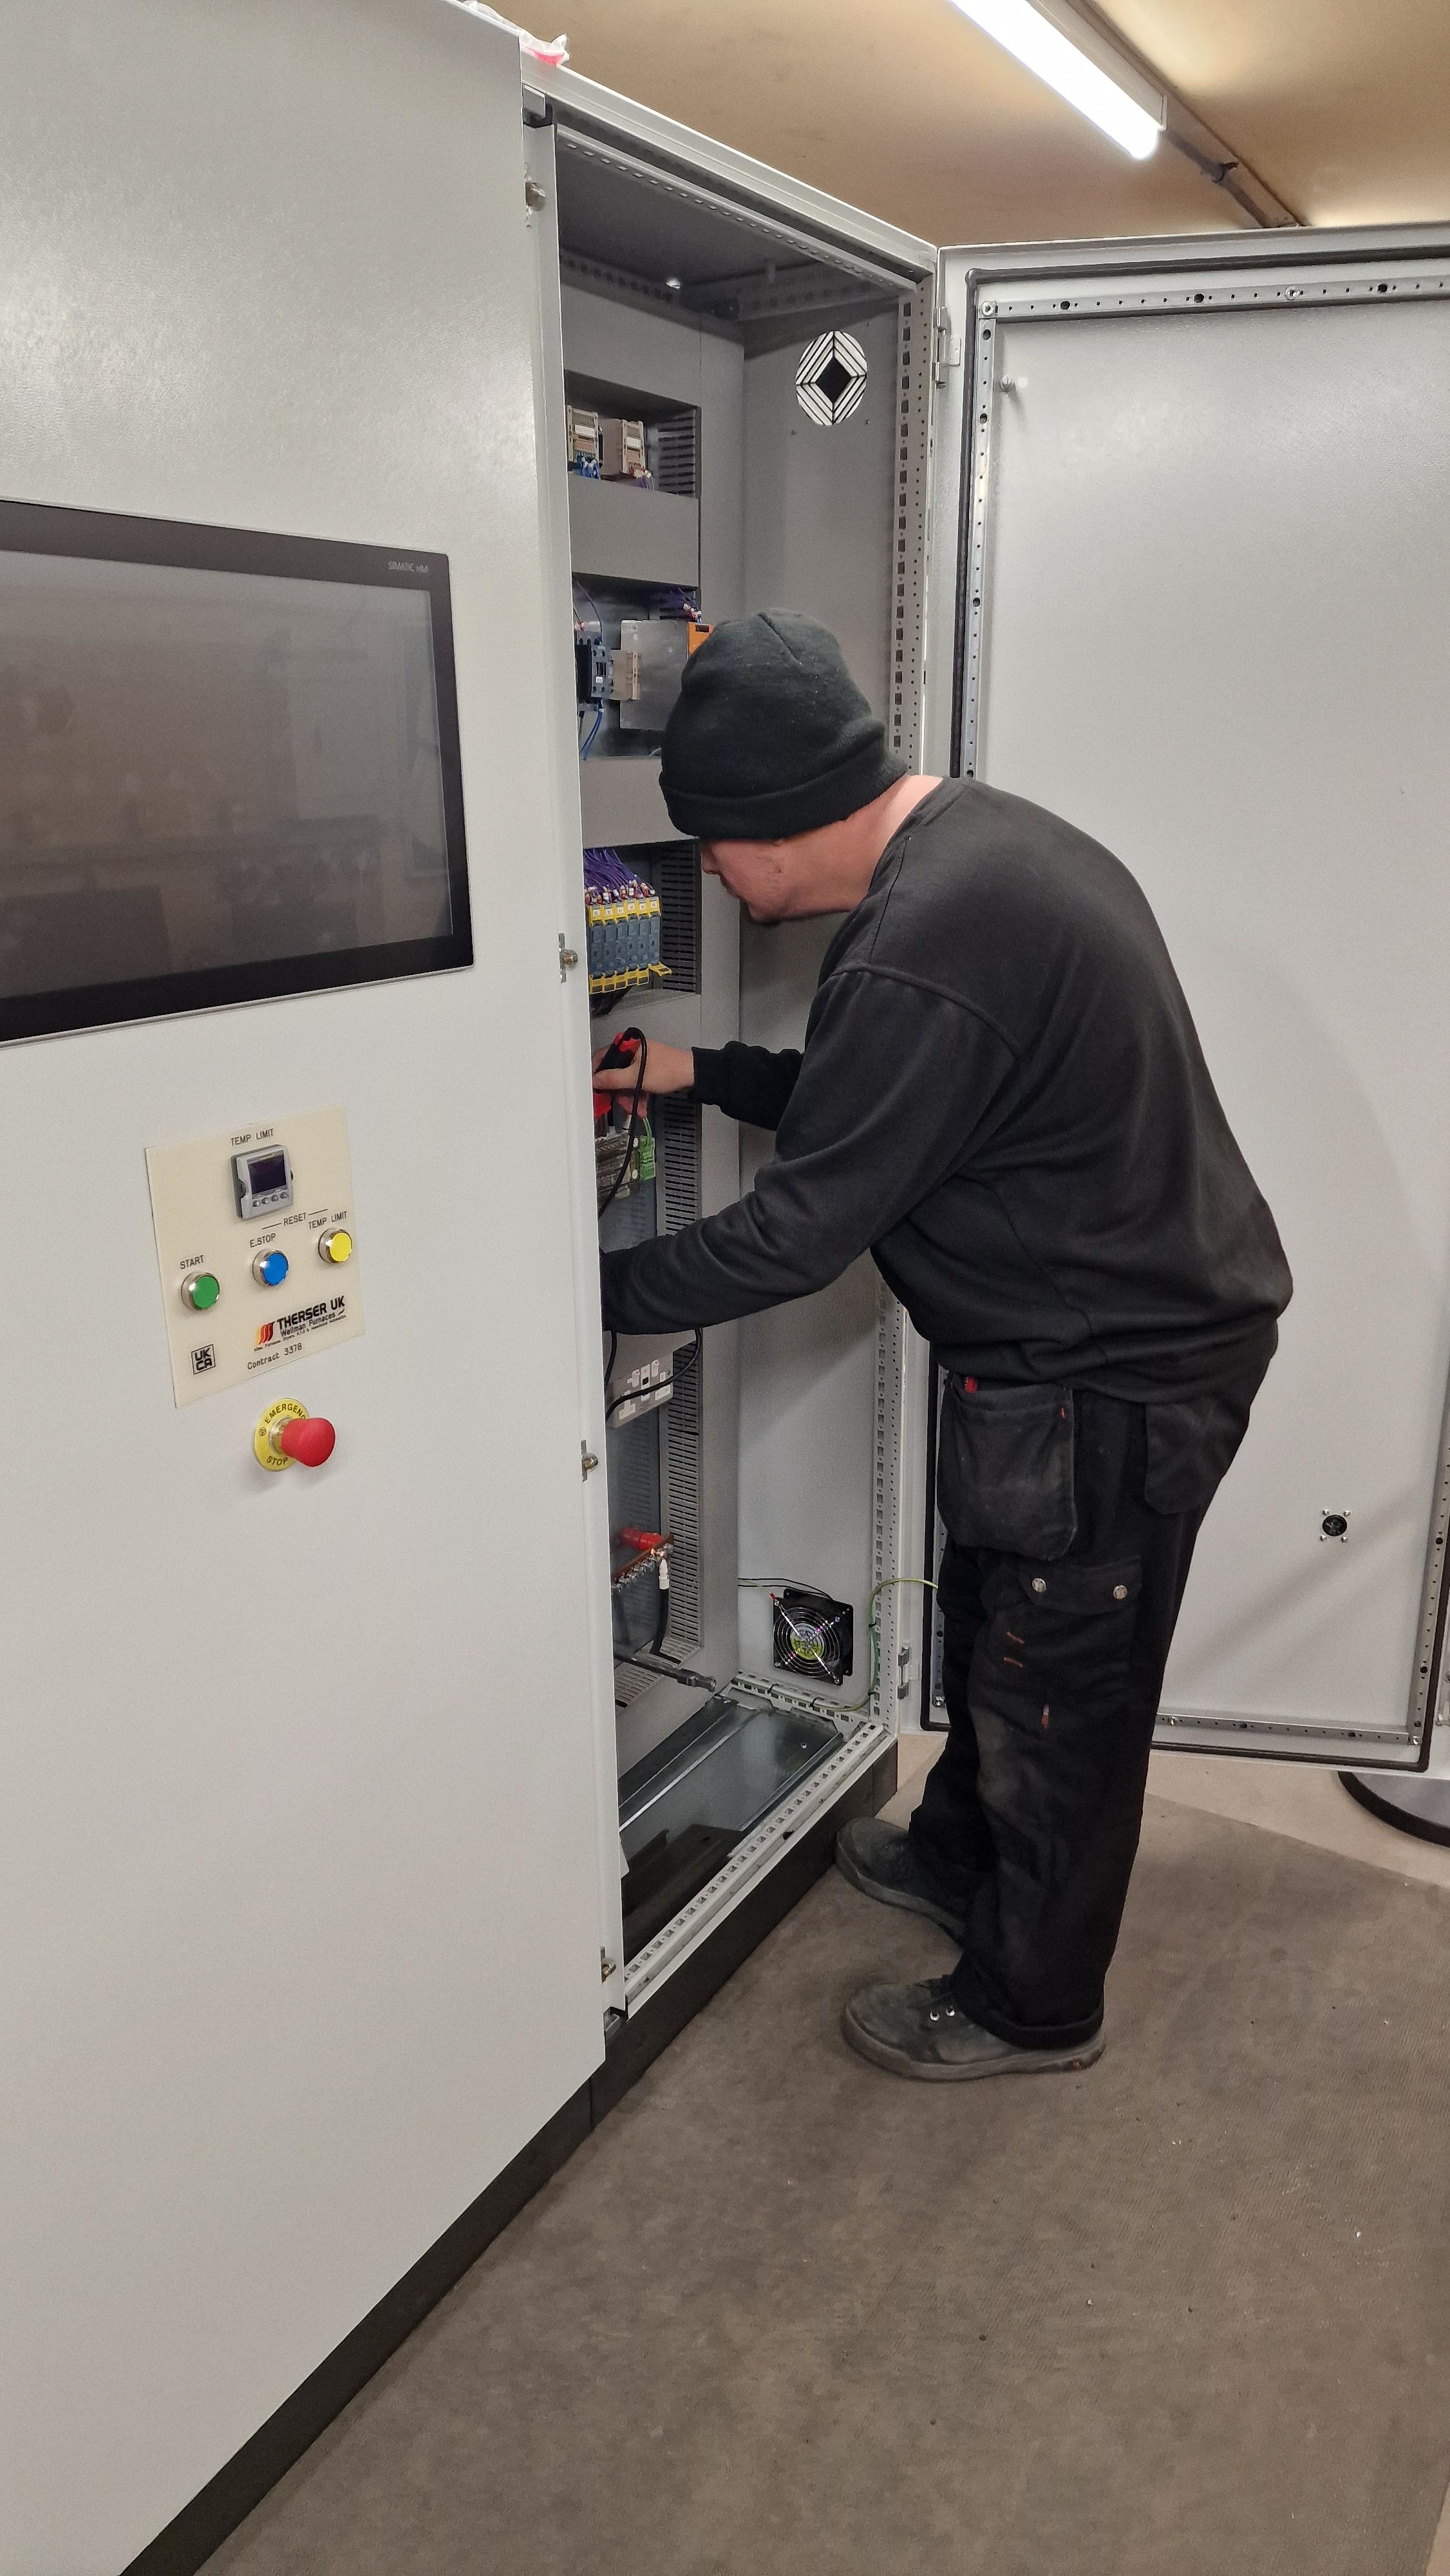 THERSER UK Builds Control Panels In-House to Your Specification